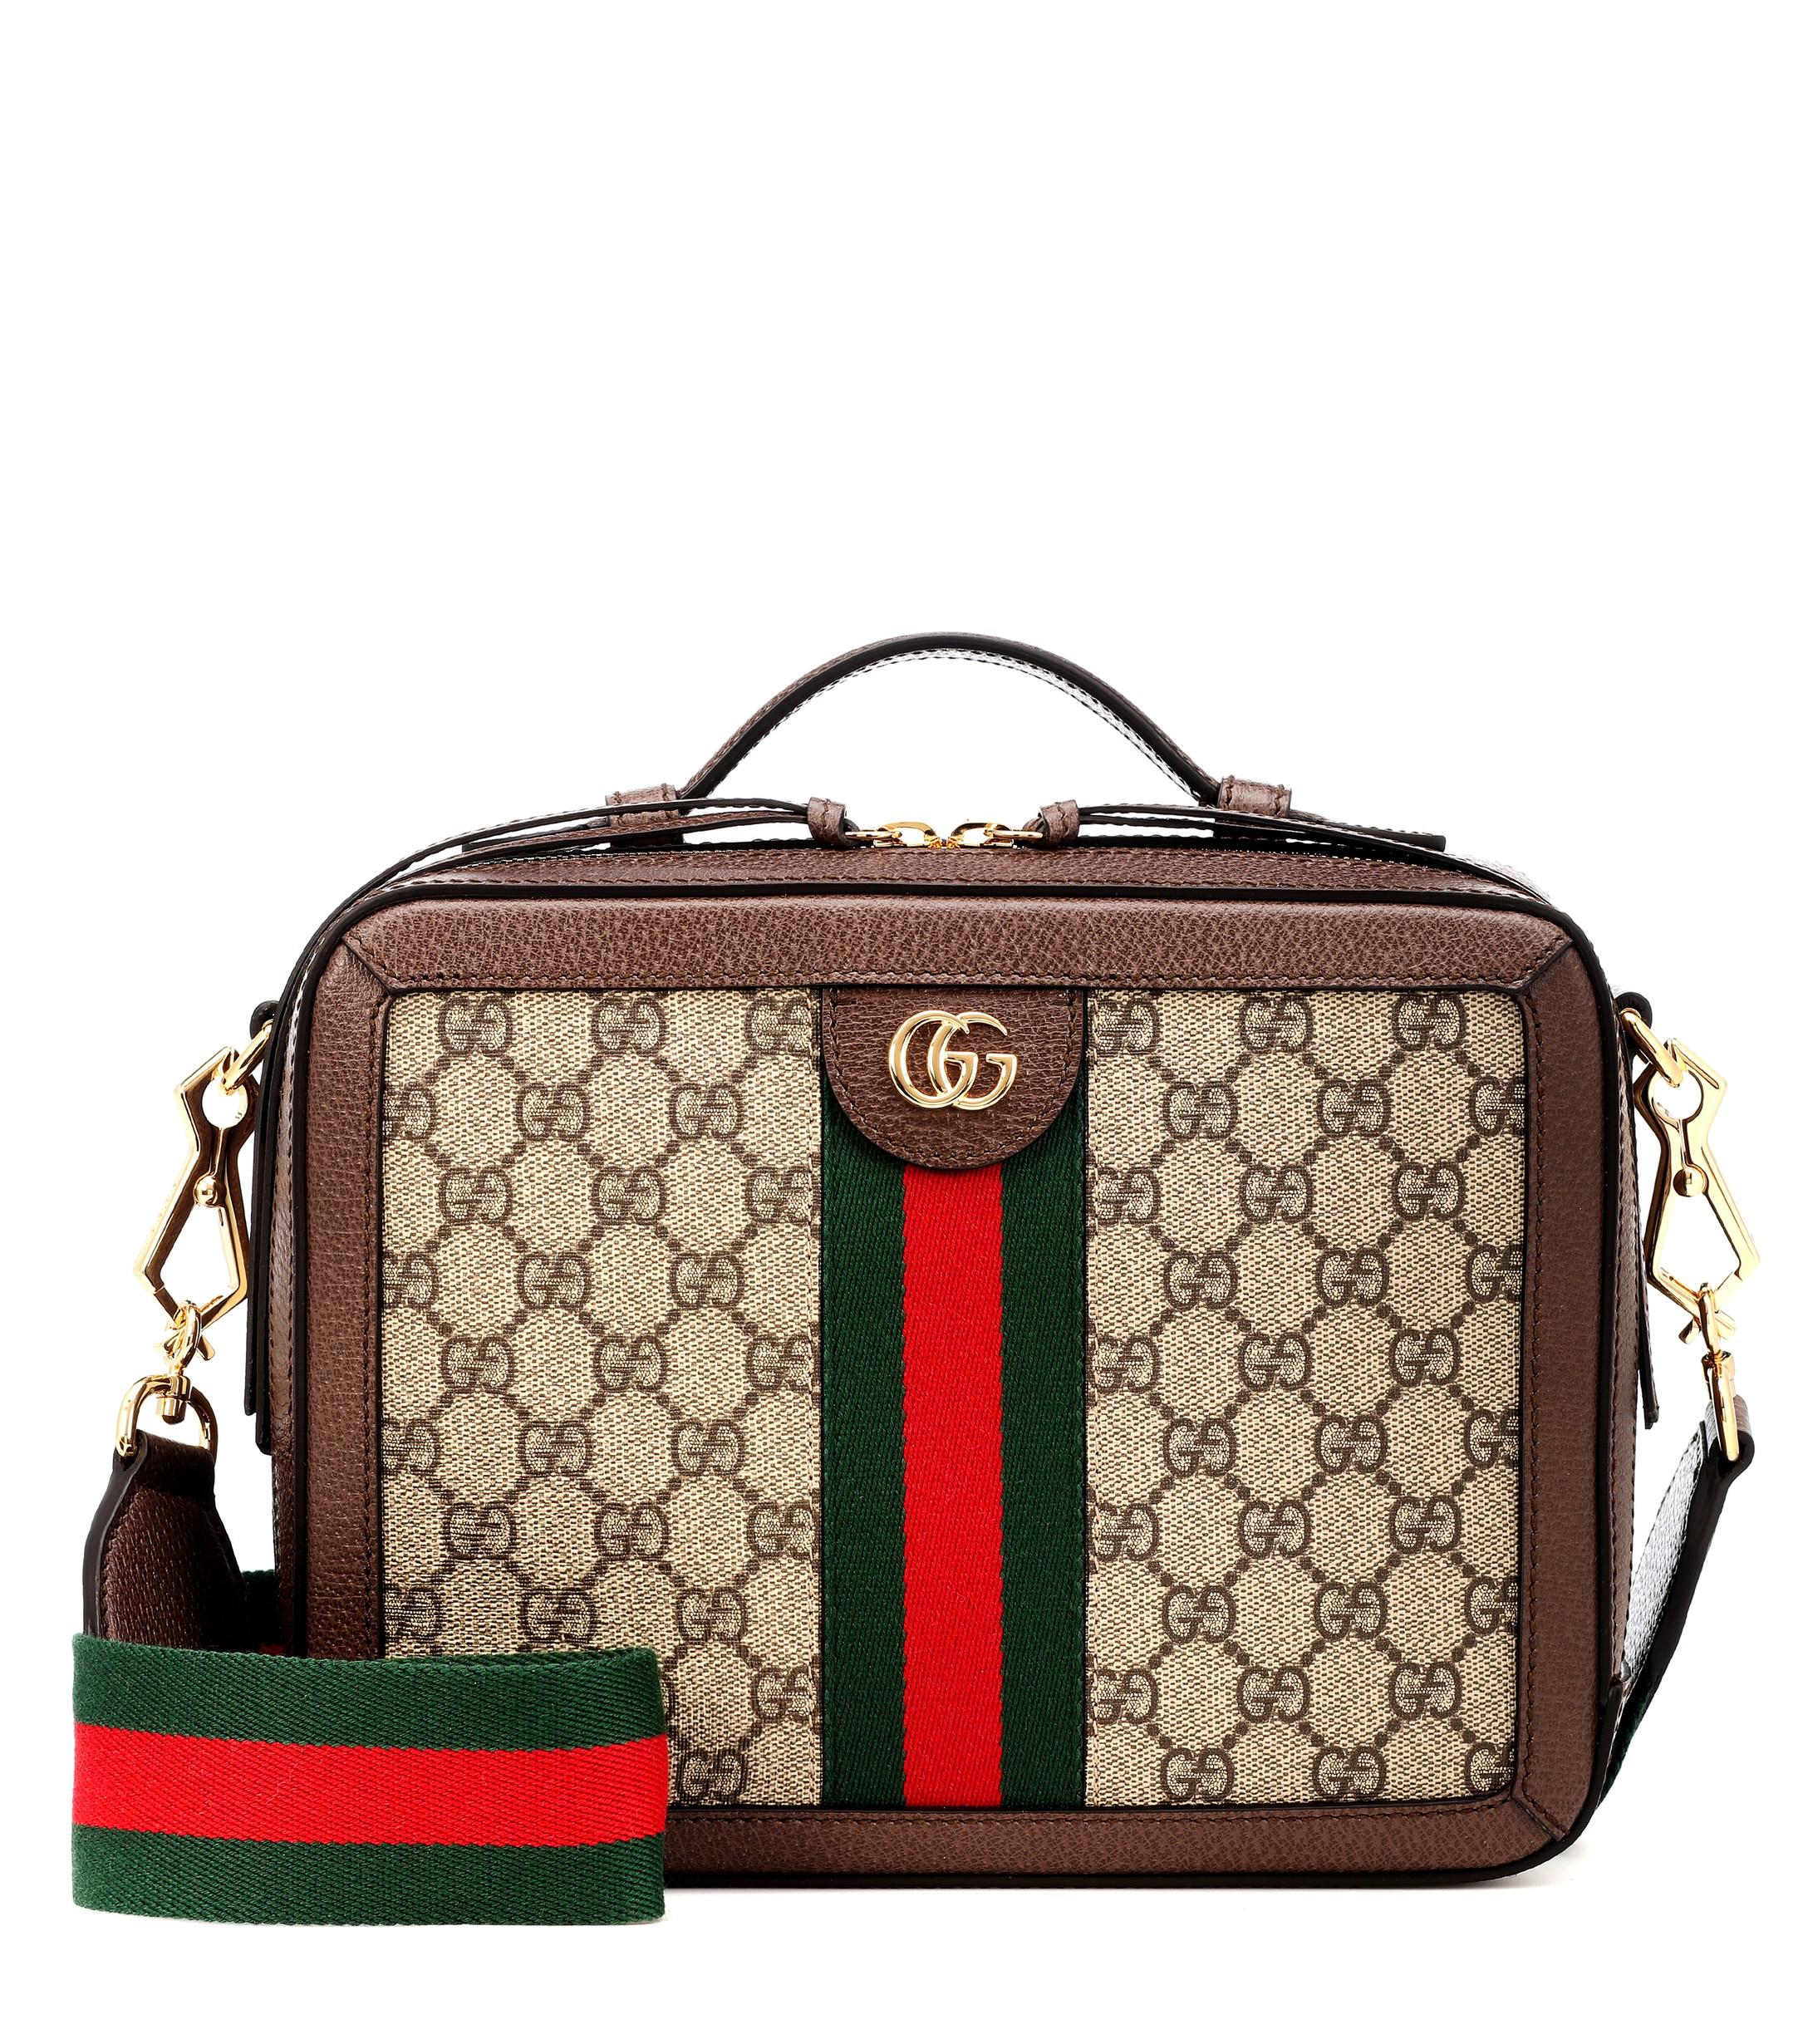 Gucci Ophidia Small GG Supreme Shoulder Bag - Lyst